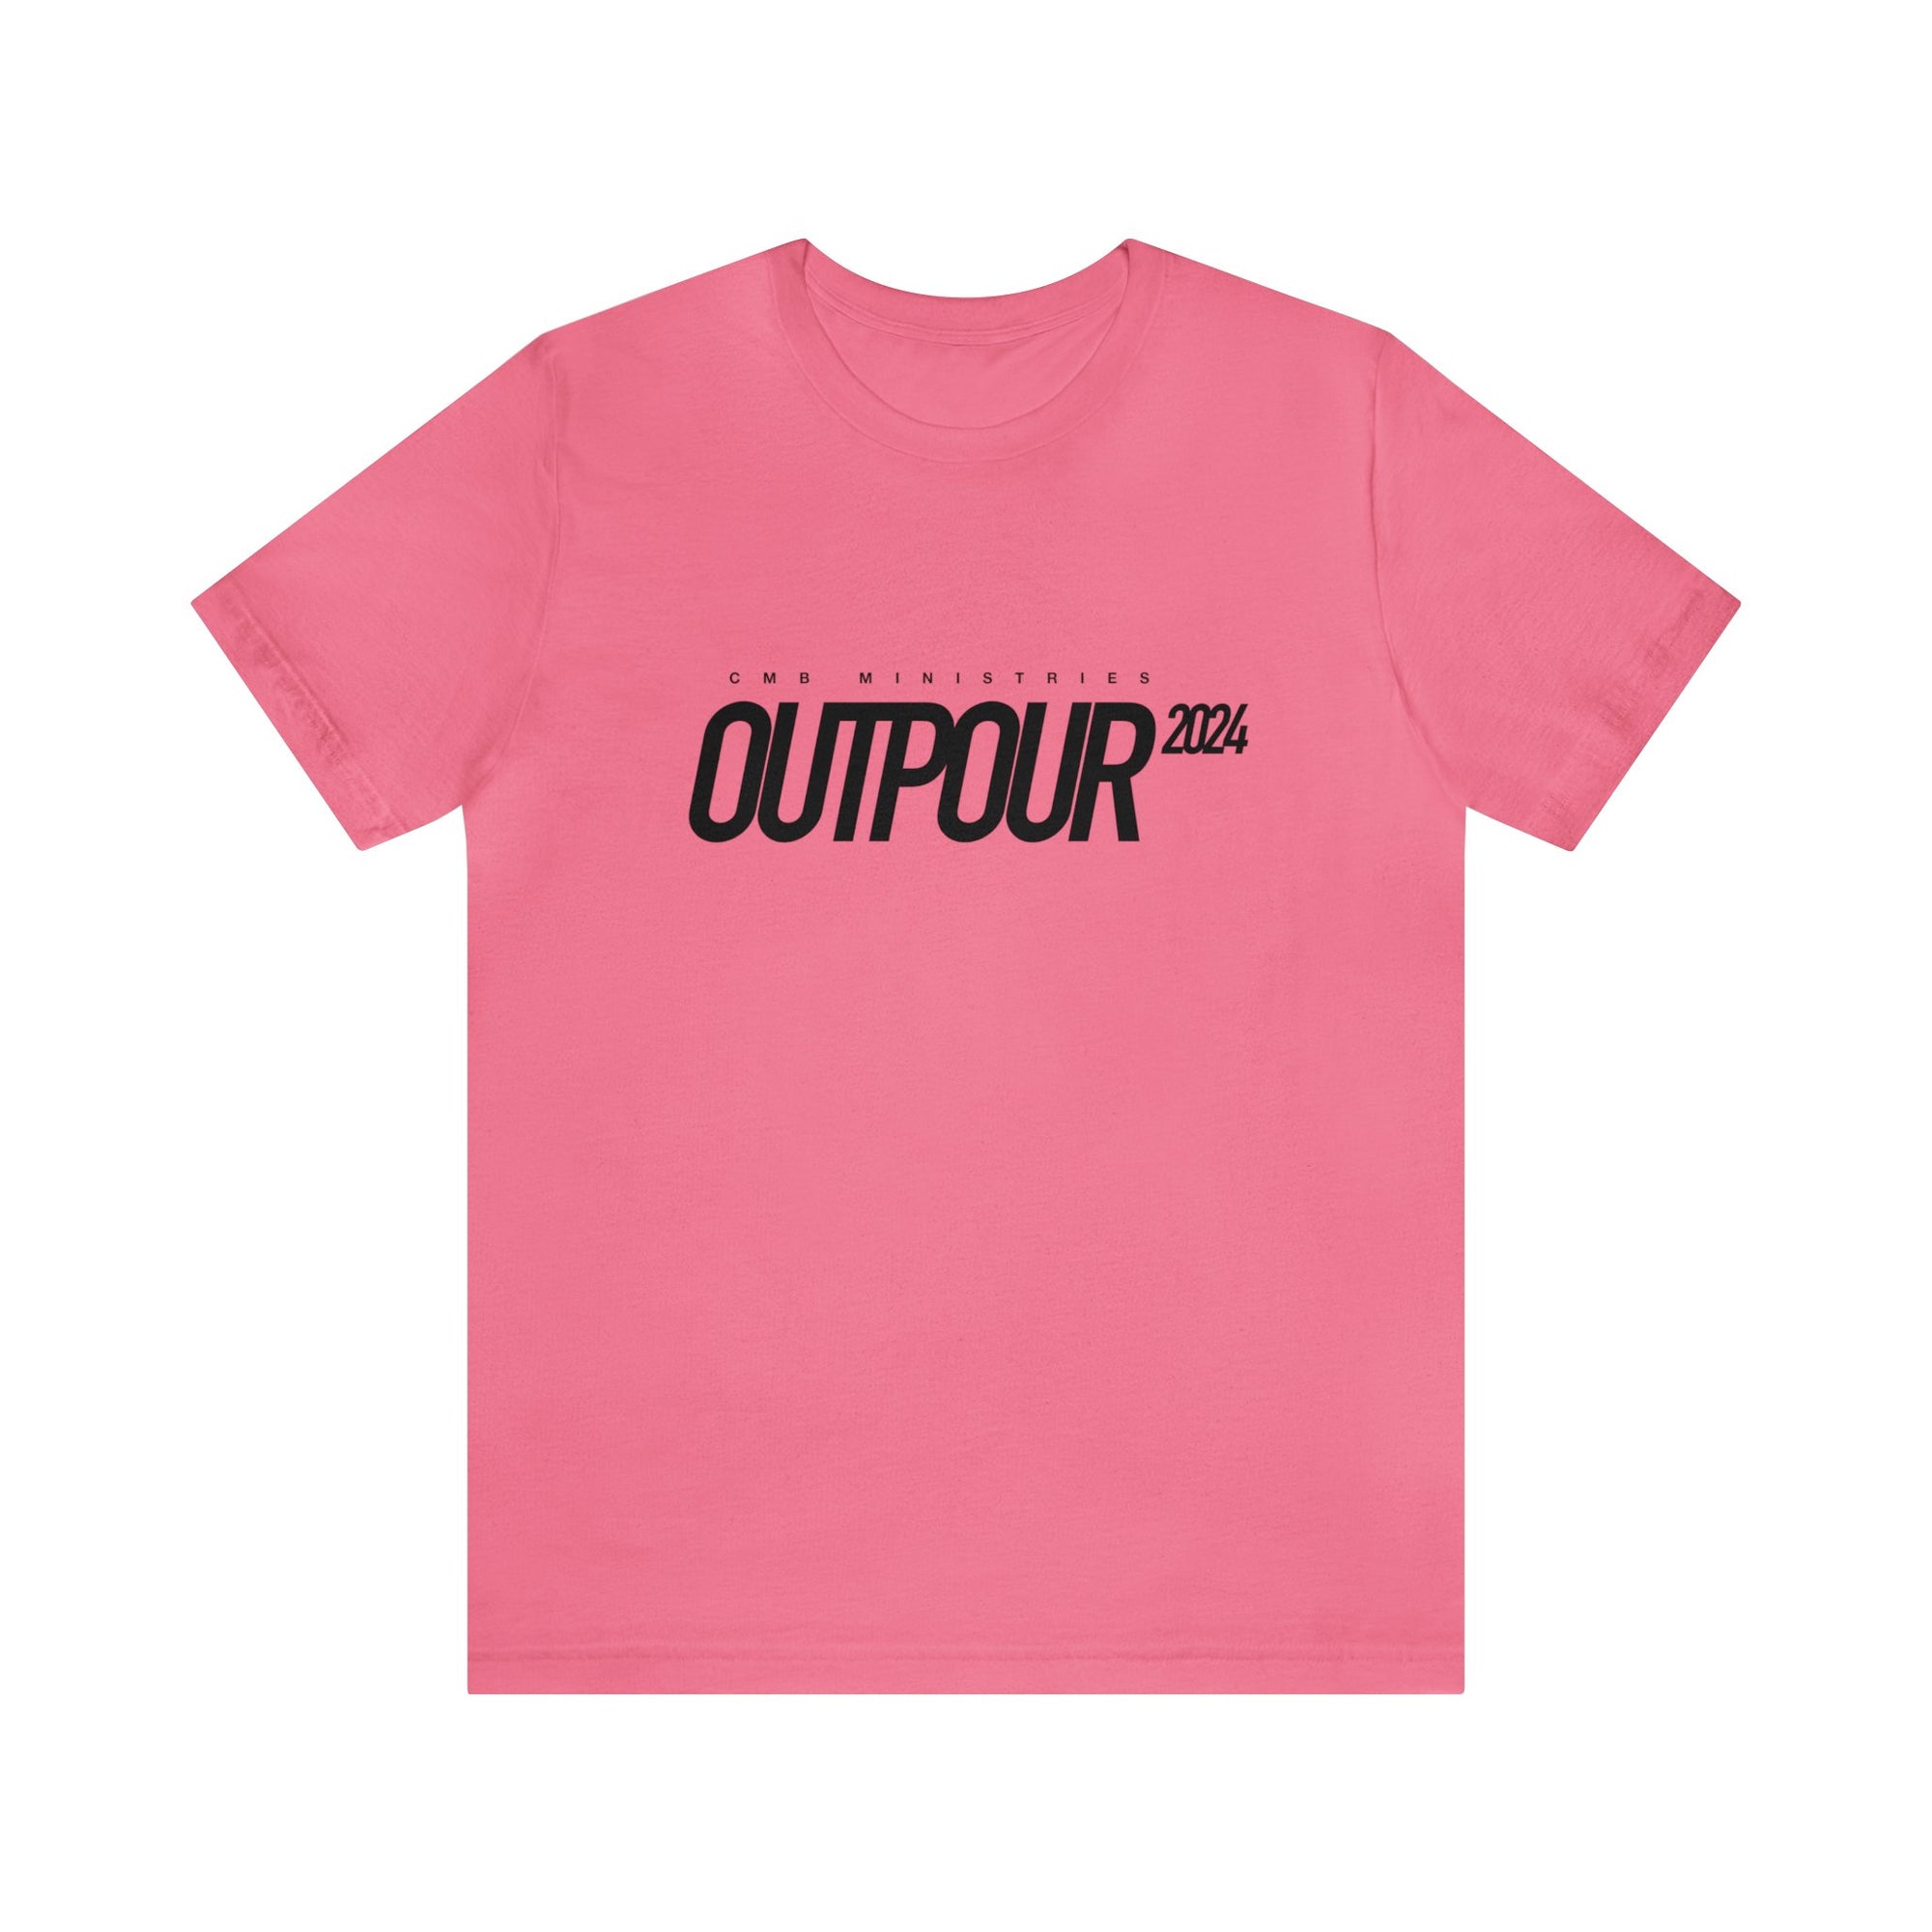 Outpour 2024 (Black) - Adult Tee